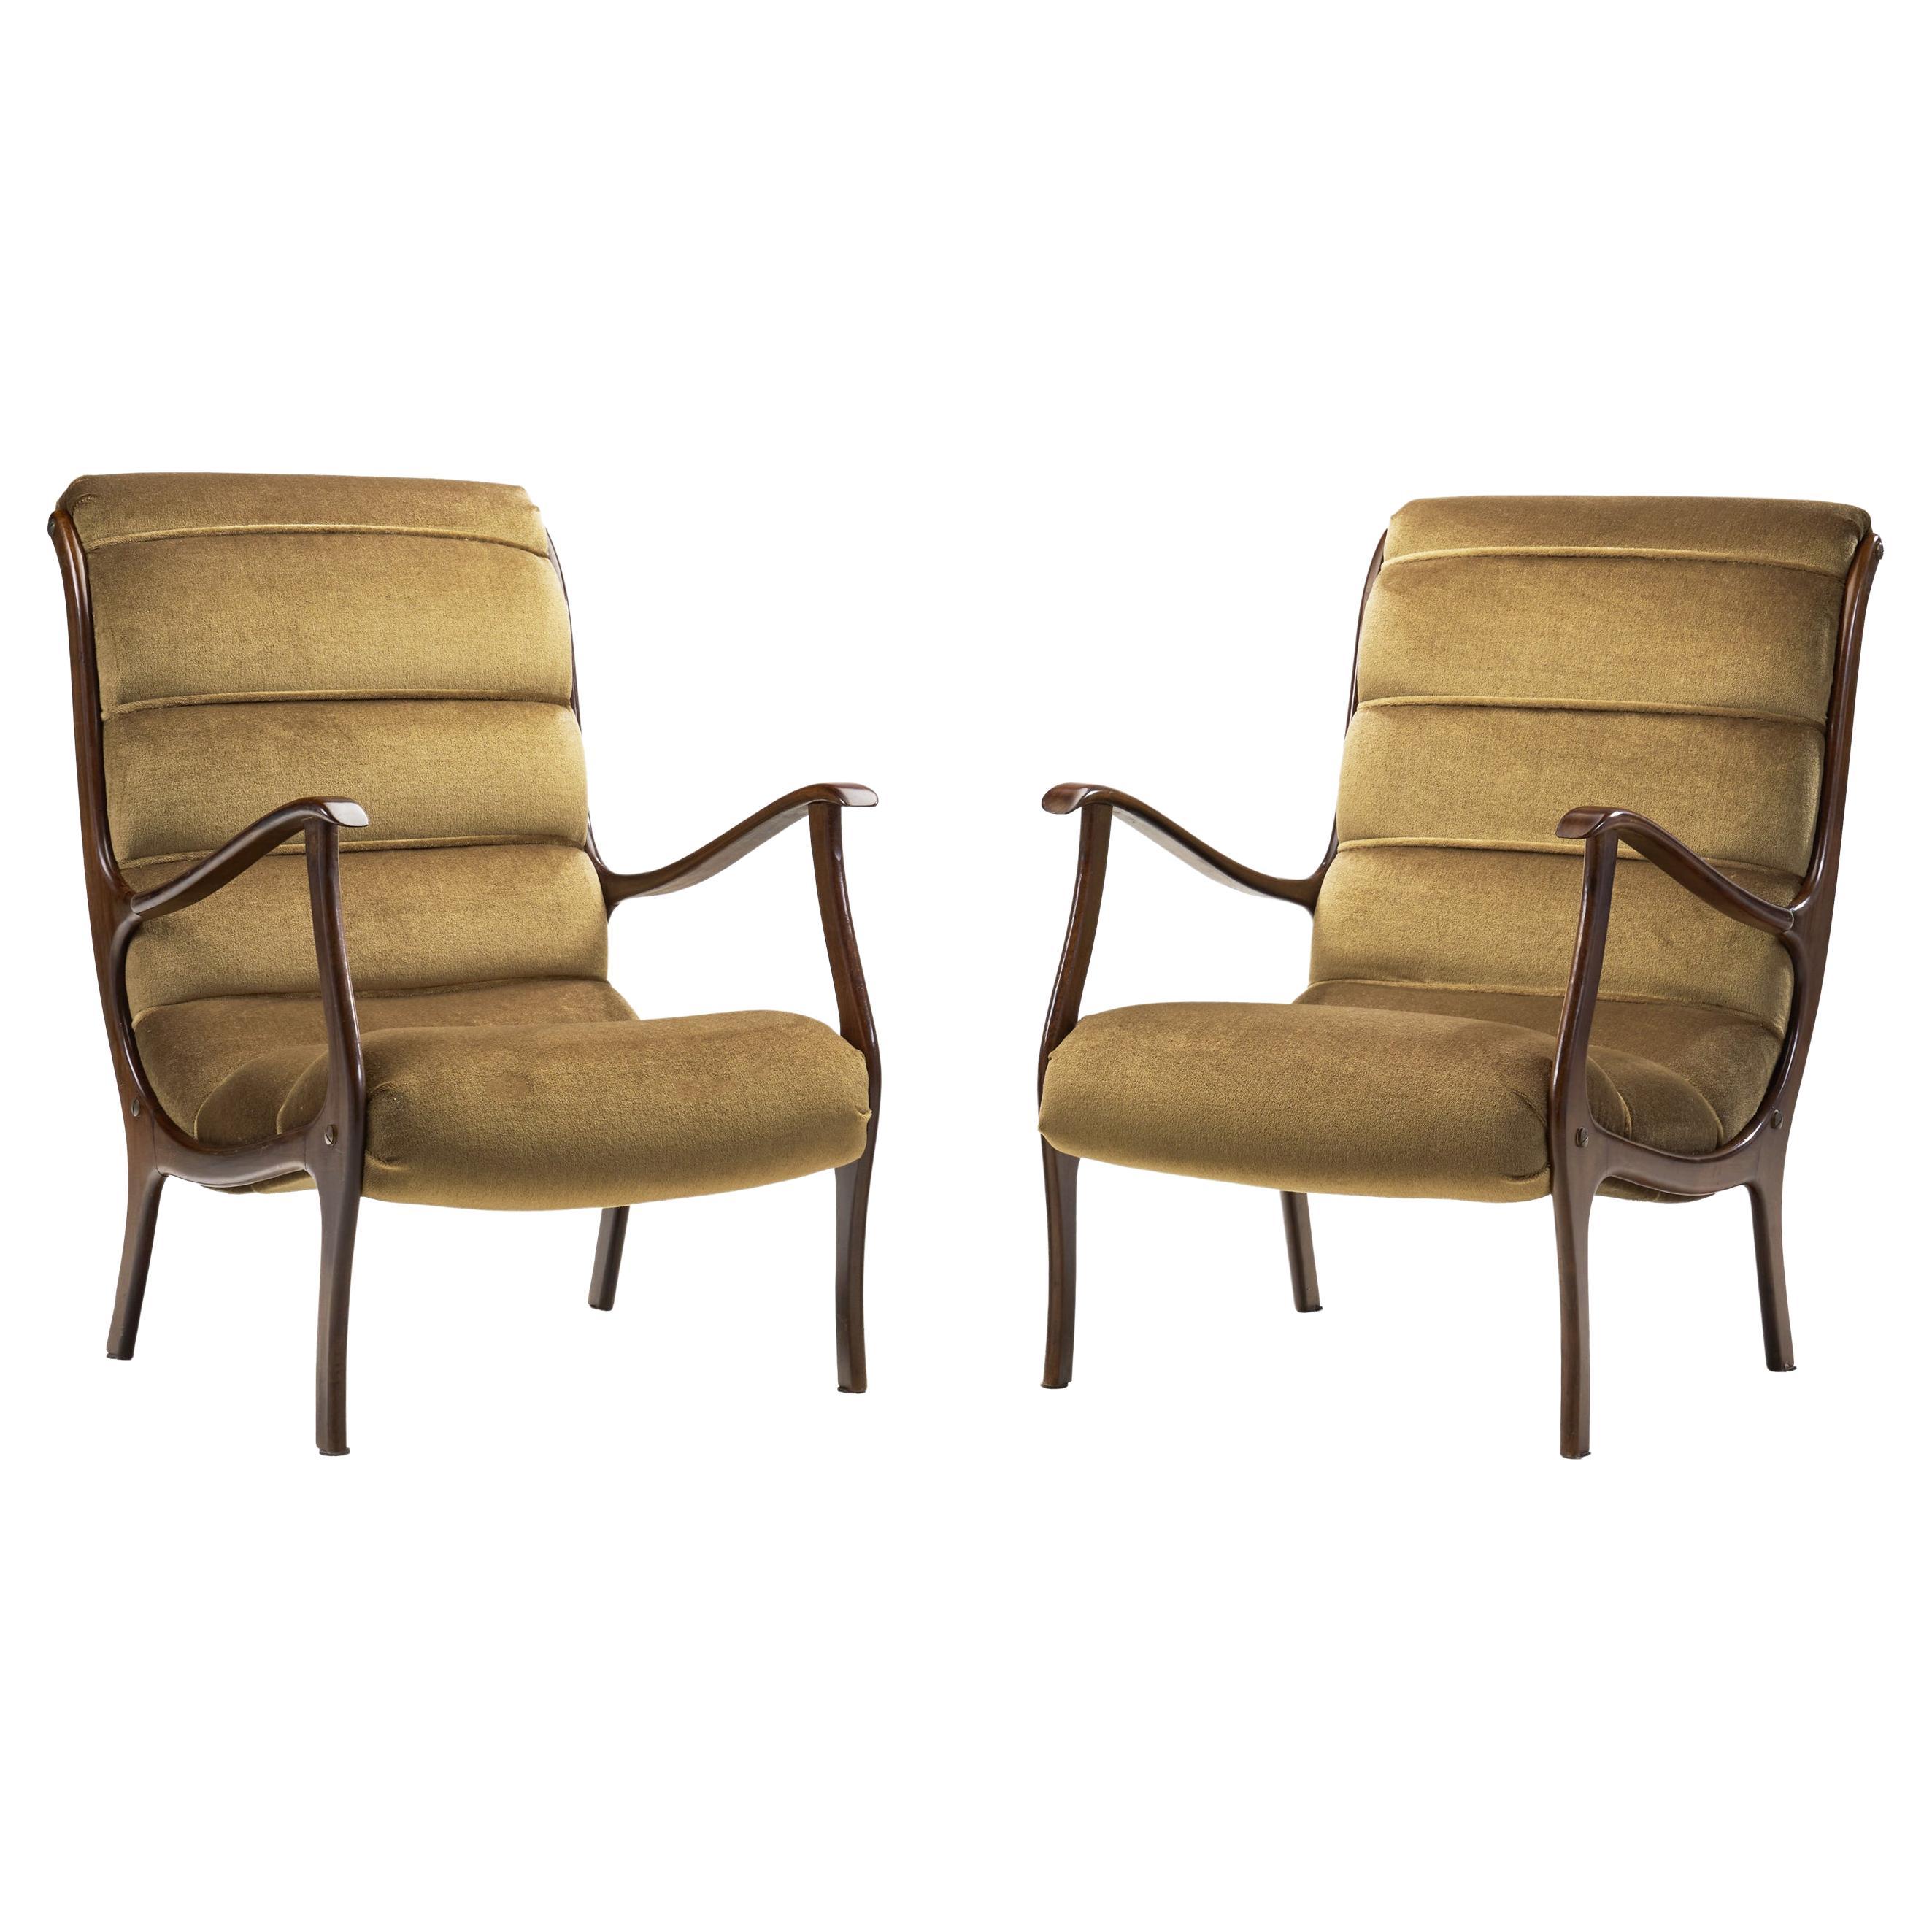 Ezio Longhi Pair of Ribbed-Back Lounge Chairs for ELAM, Italy, 1960s